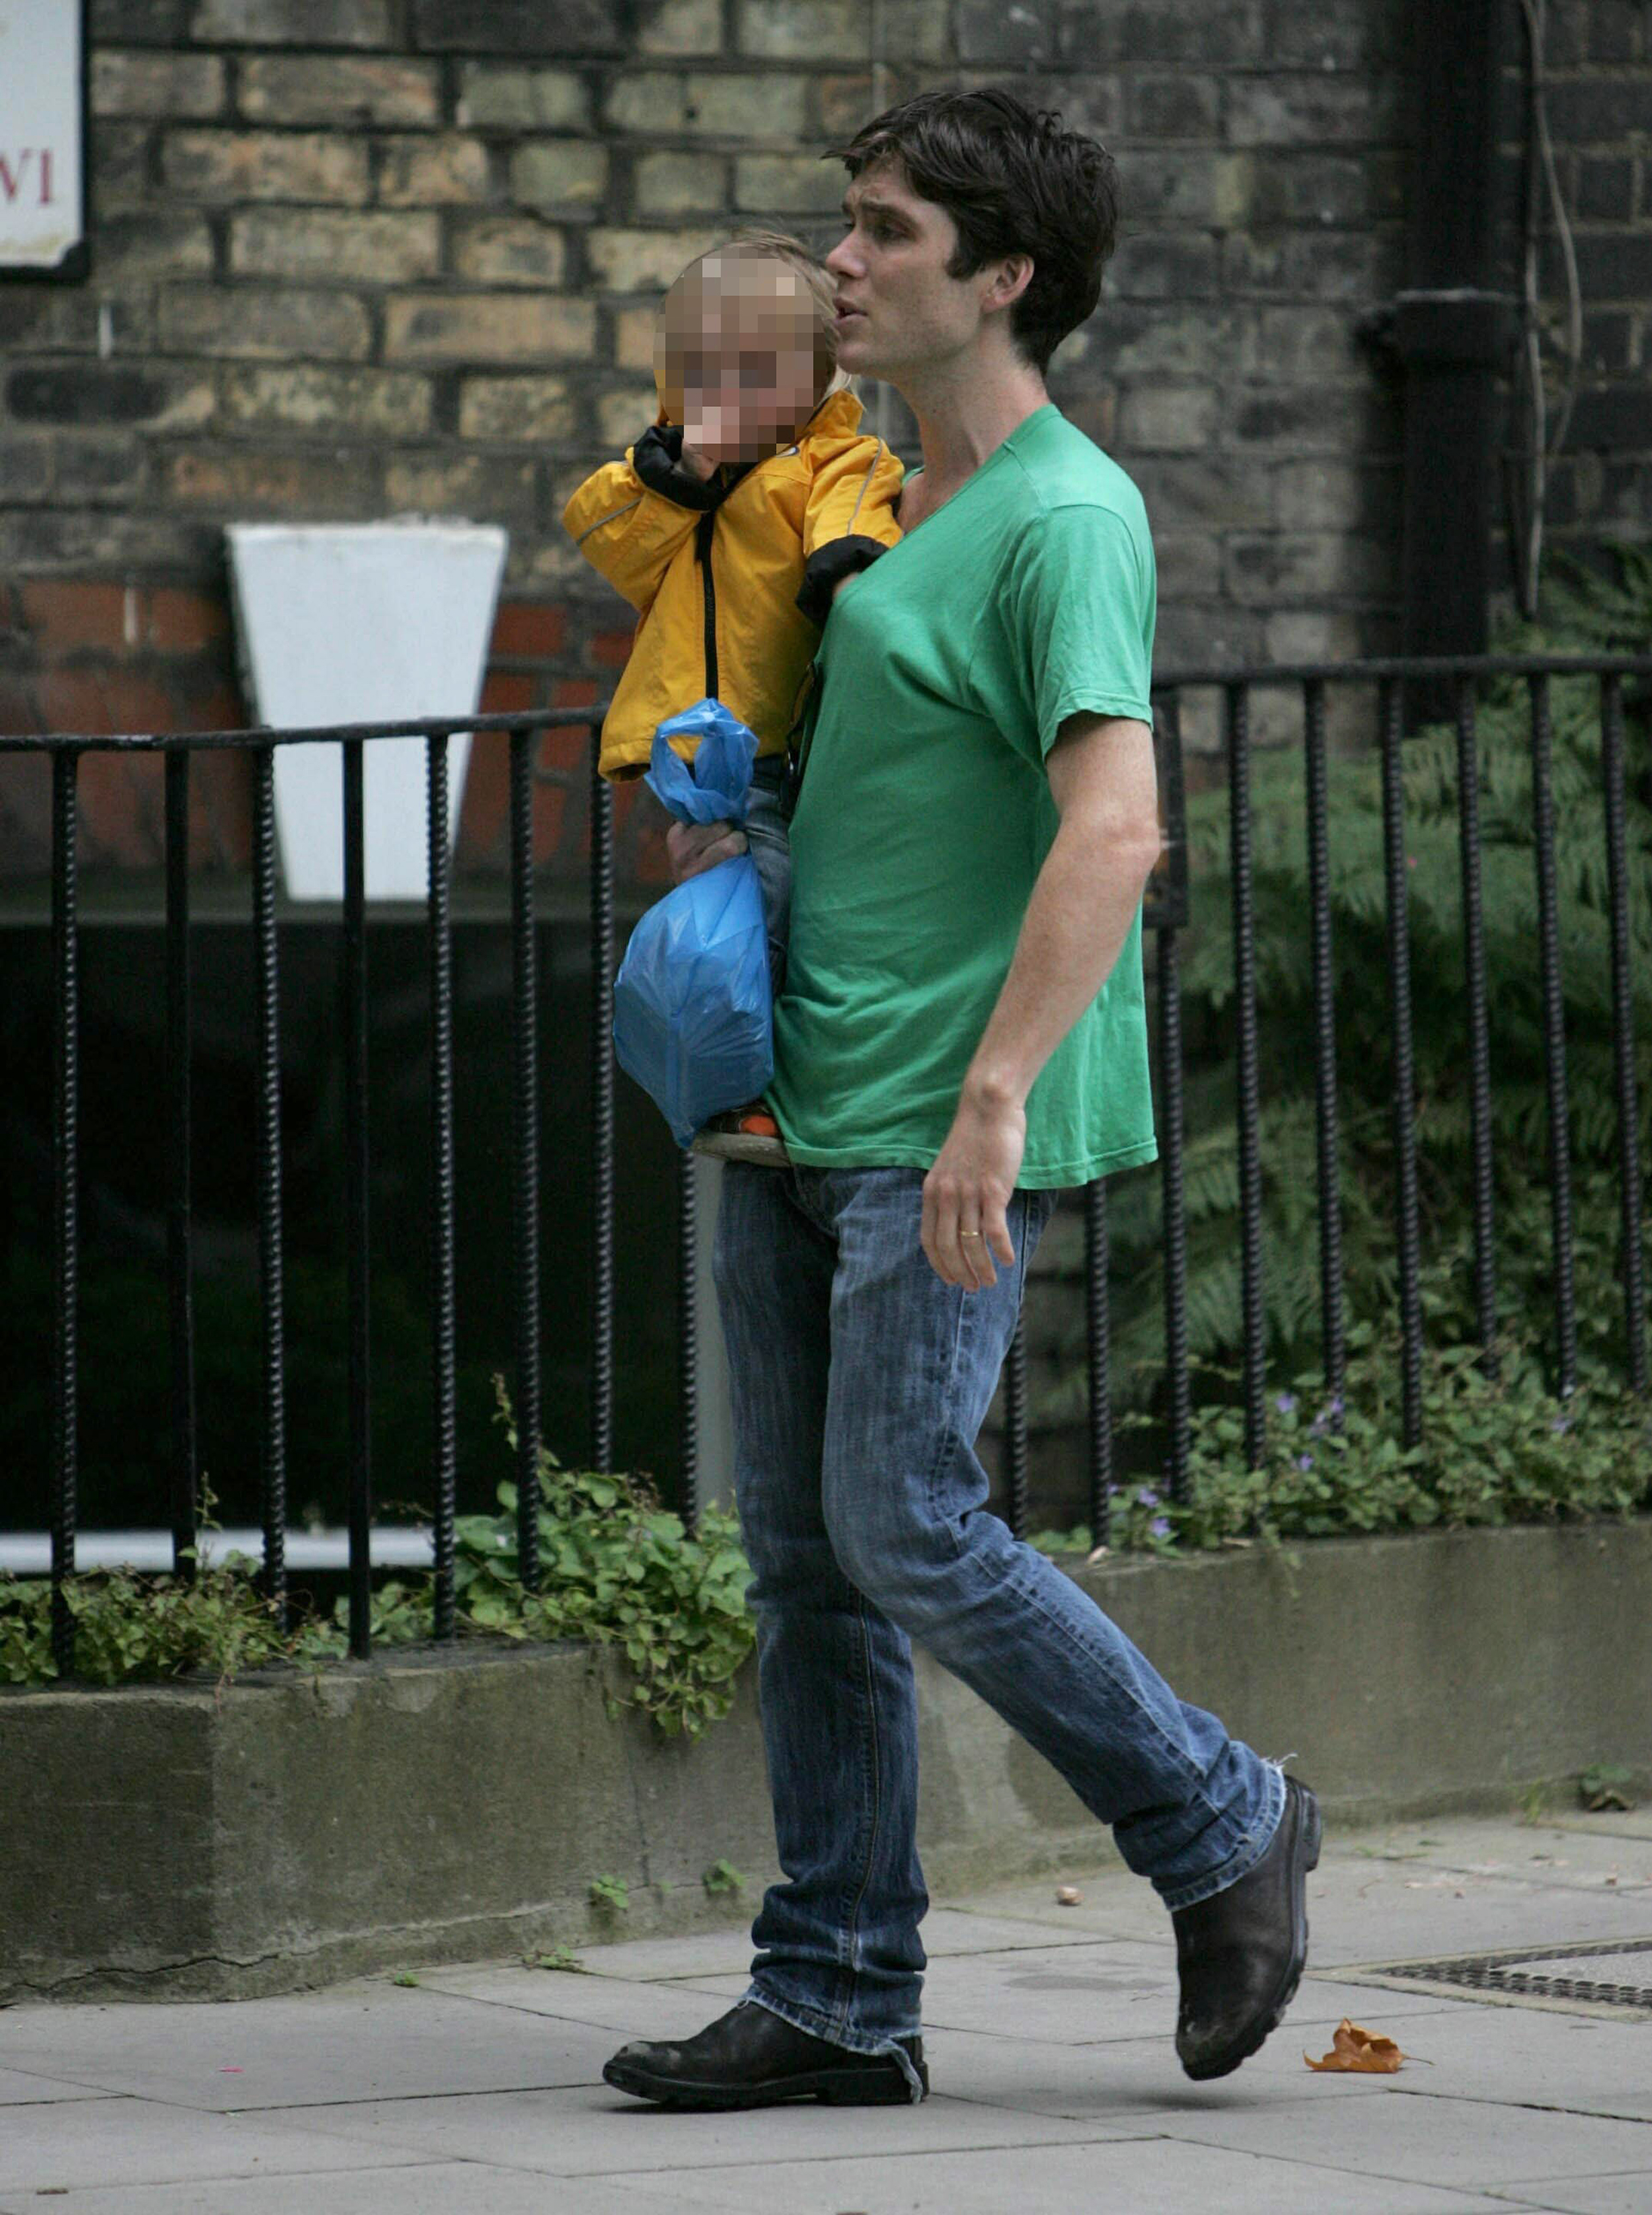 Cillian Murphy out and about in North London, Britain - 23 Jul 2007 (The Grosby Group)